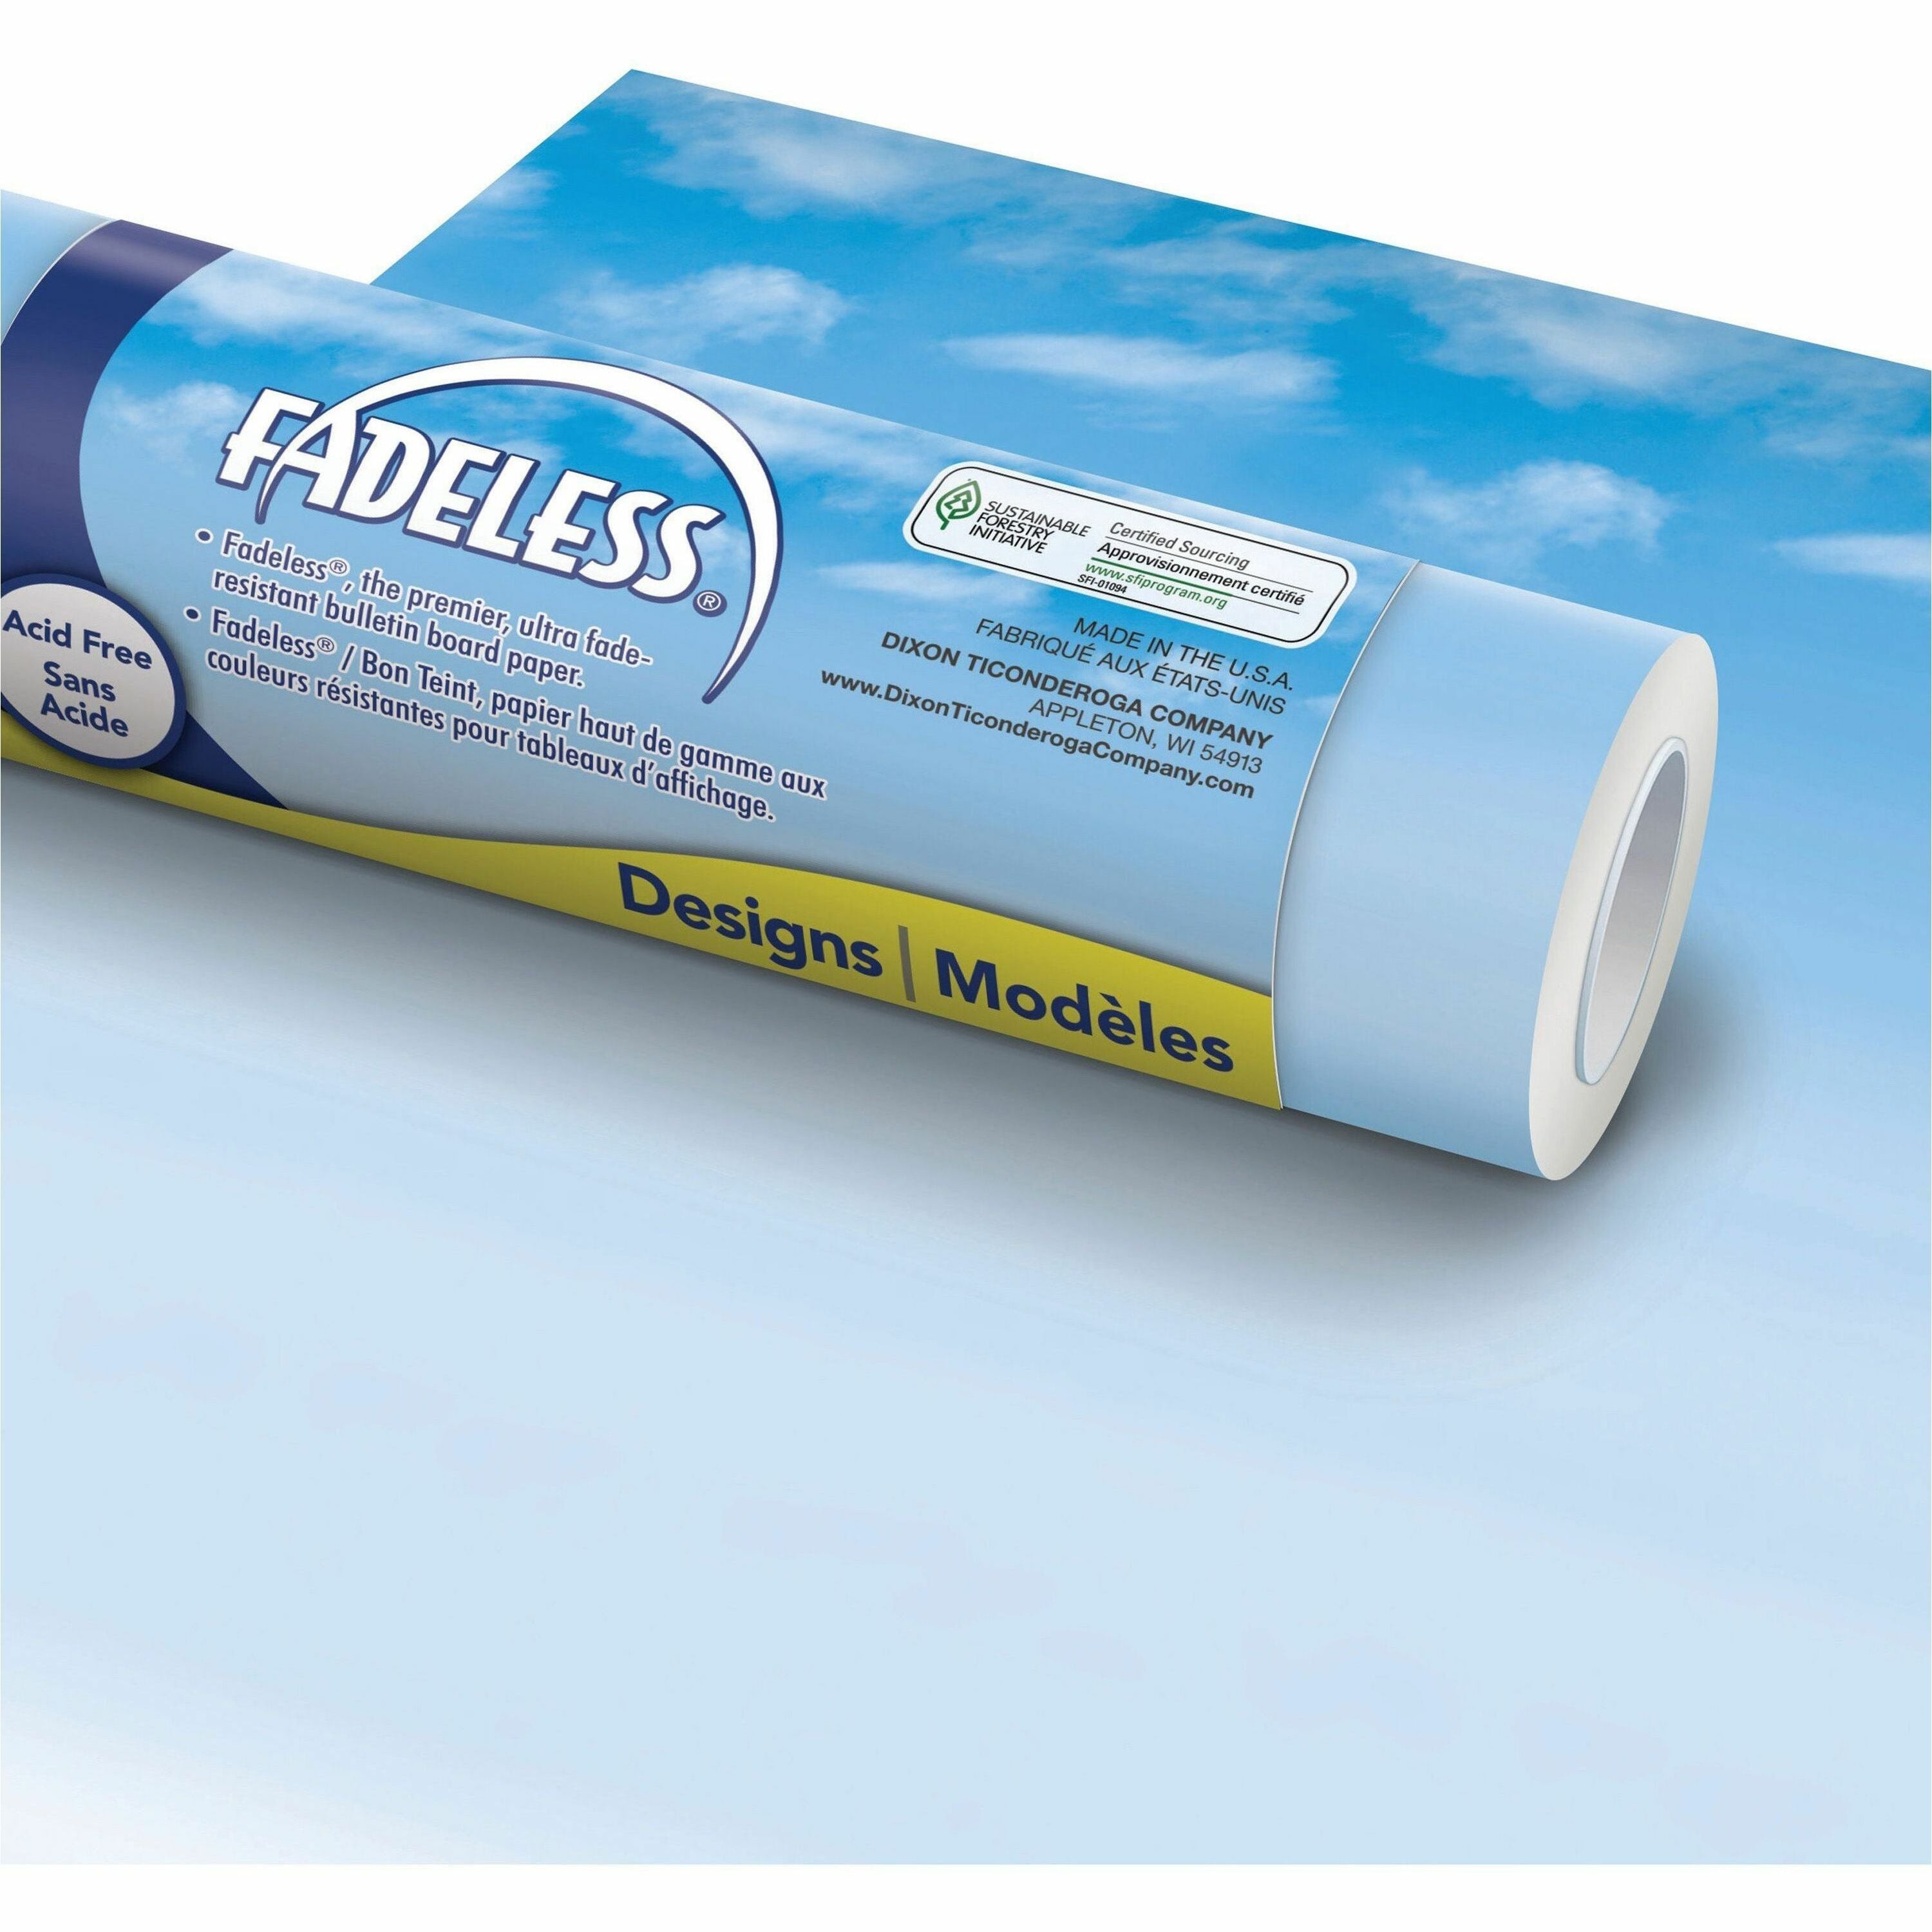 fadeless-bulletin-board-paper-rolls-classroom-door-file-cabinet-school-home-office-project-display-table-skirting-party-decoration-48width-x-50-ftlength-1-roll-wispy-clouds-paper_pacp0056935 - 1